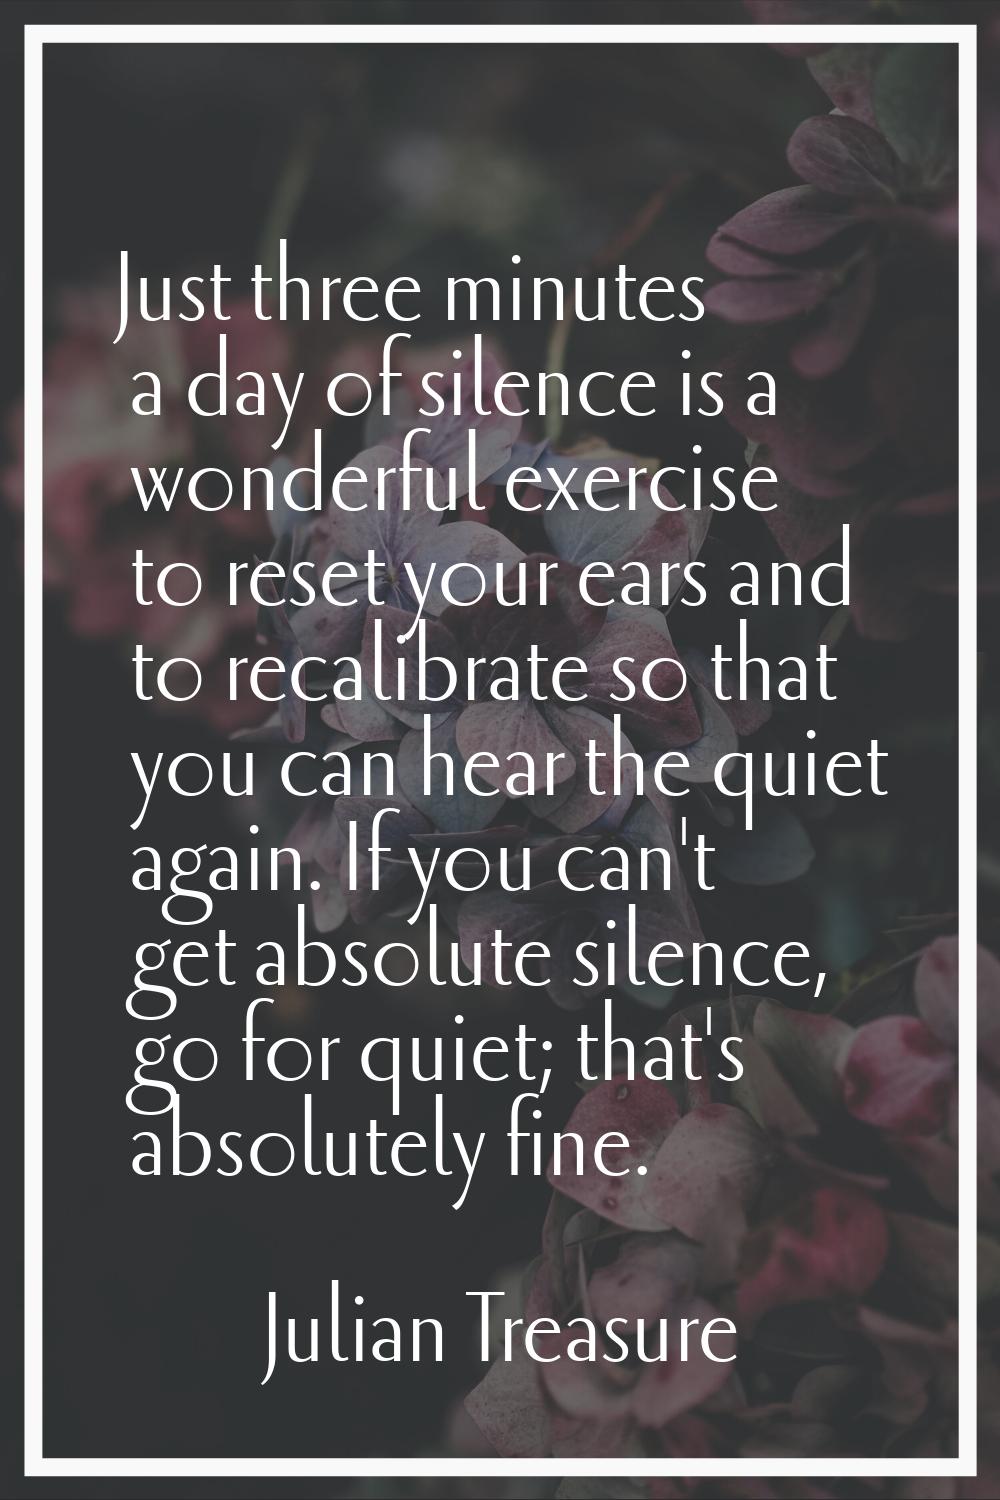 Just three minutes a day of silence is a wonderful exercise to reset your ears and to recalibrate s